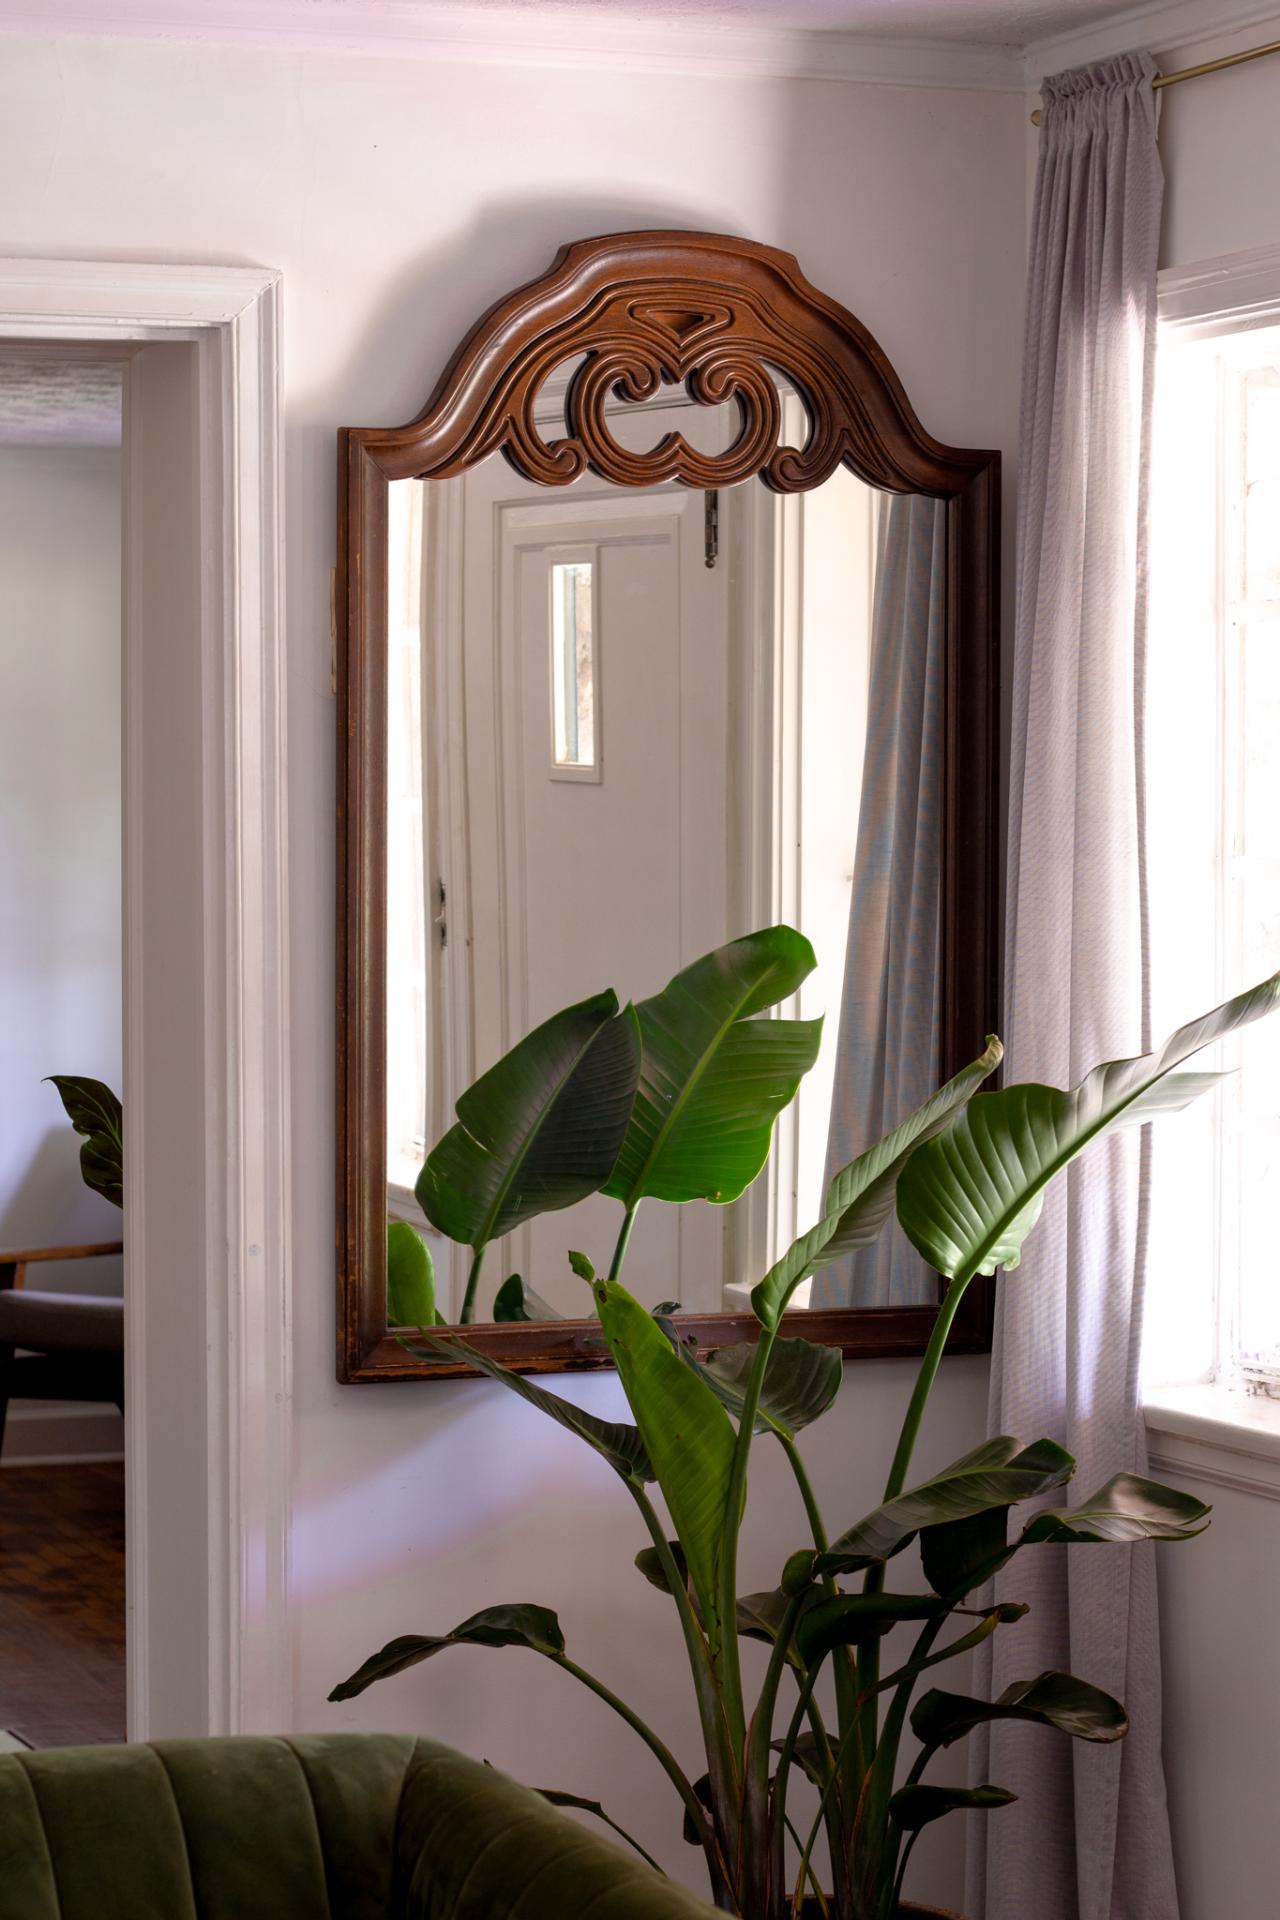 How To Hang A Heavy Mirror With, How To Hang A Mirror On An Angle